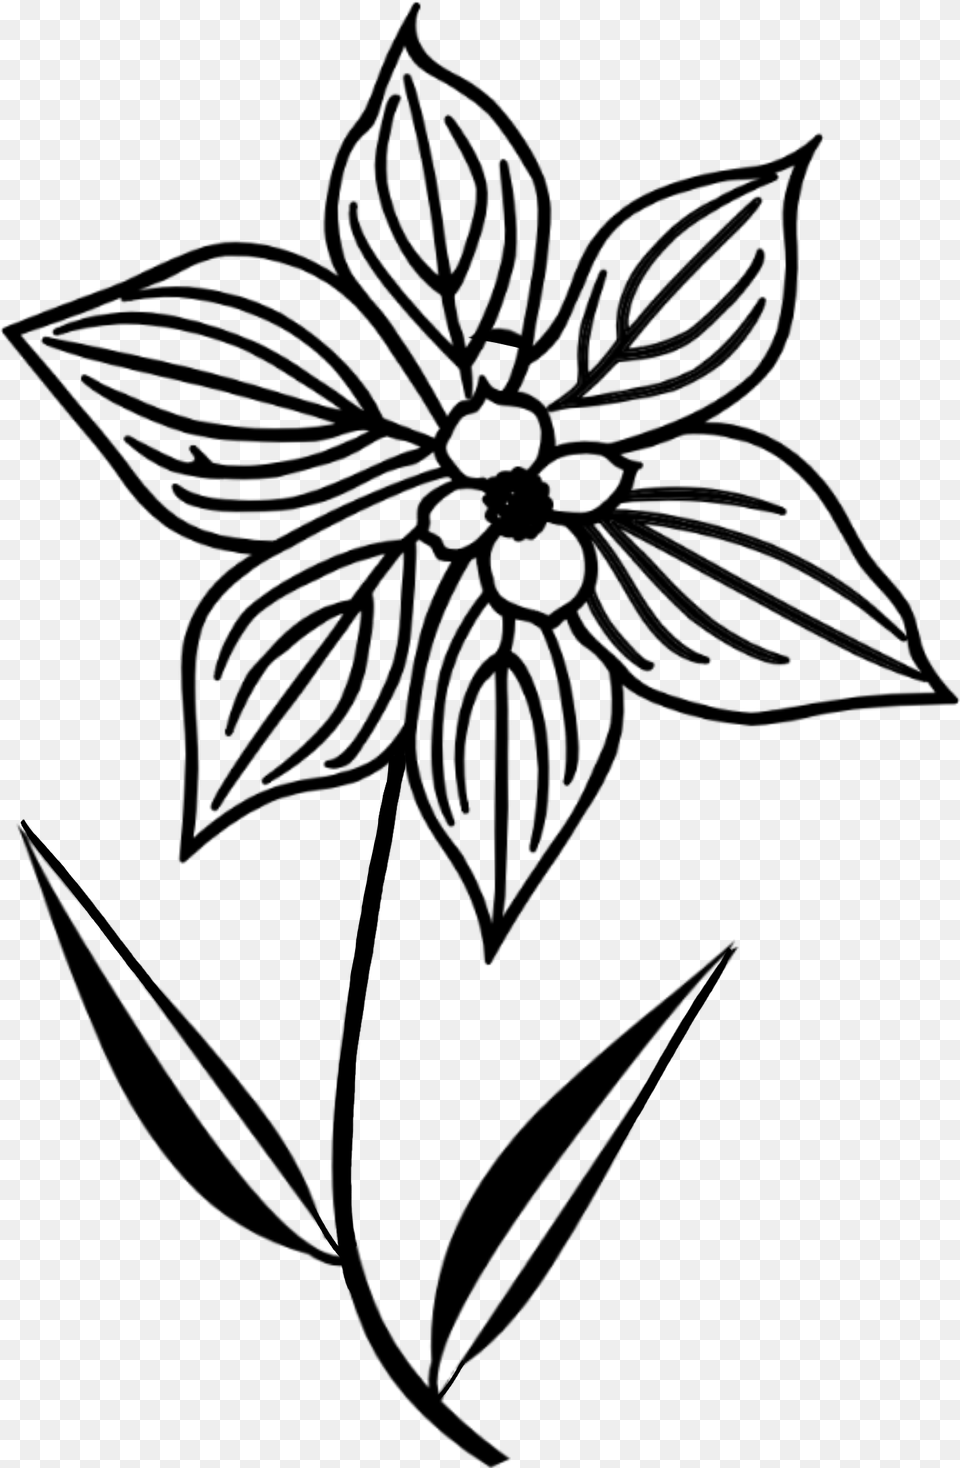 Doodle Flower Silhouettesome Outline Of A Flower, Gray Free Png